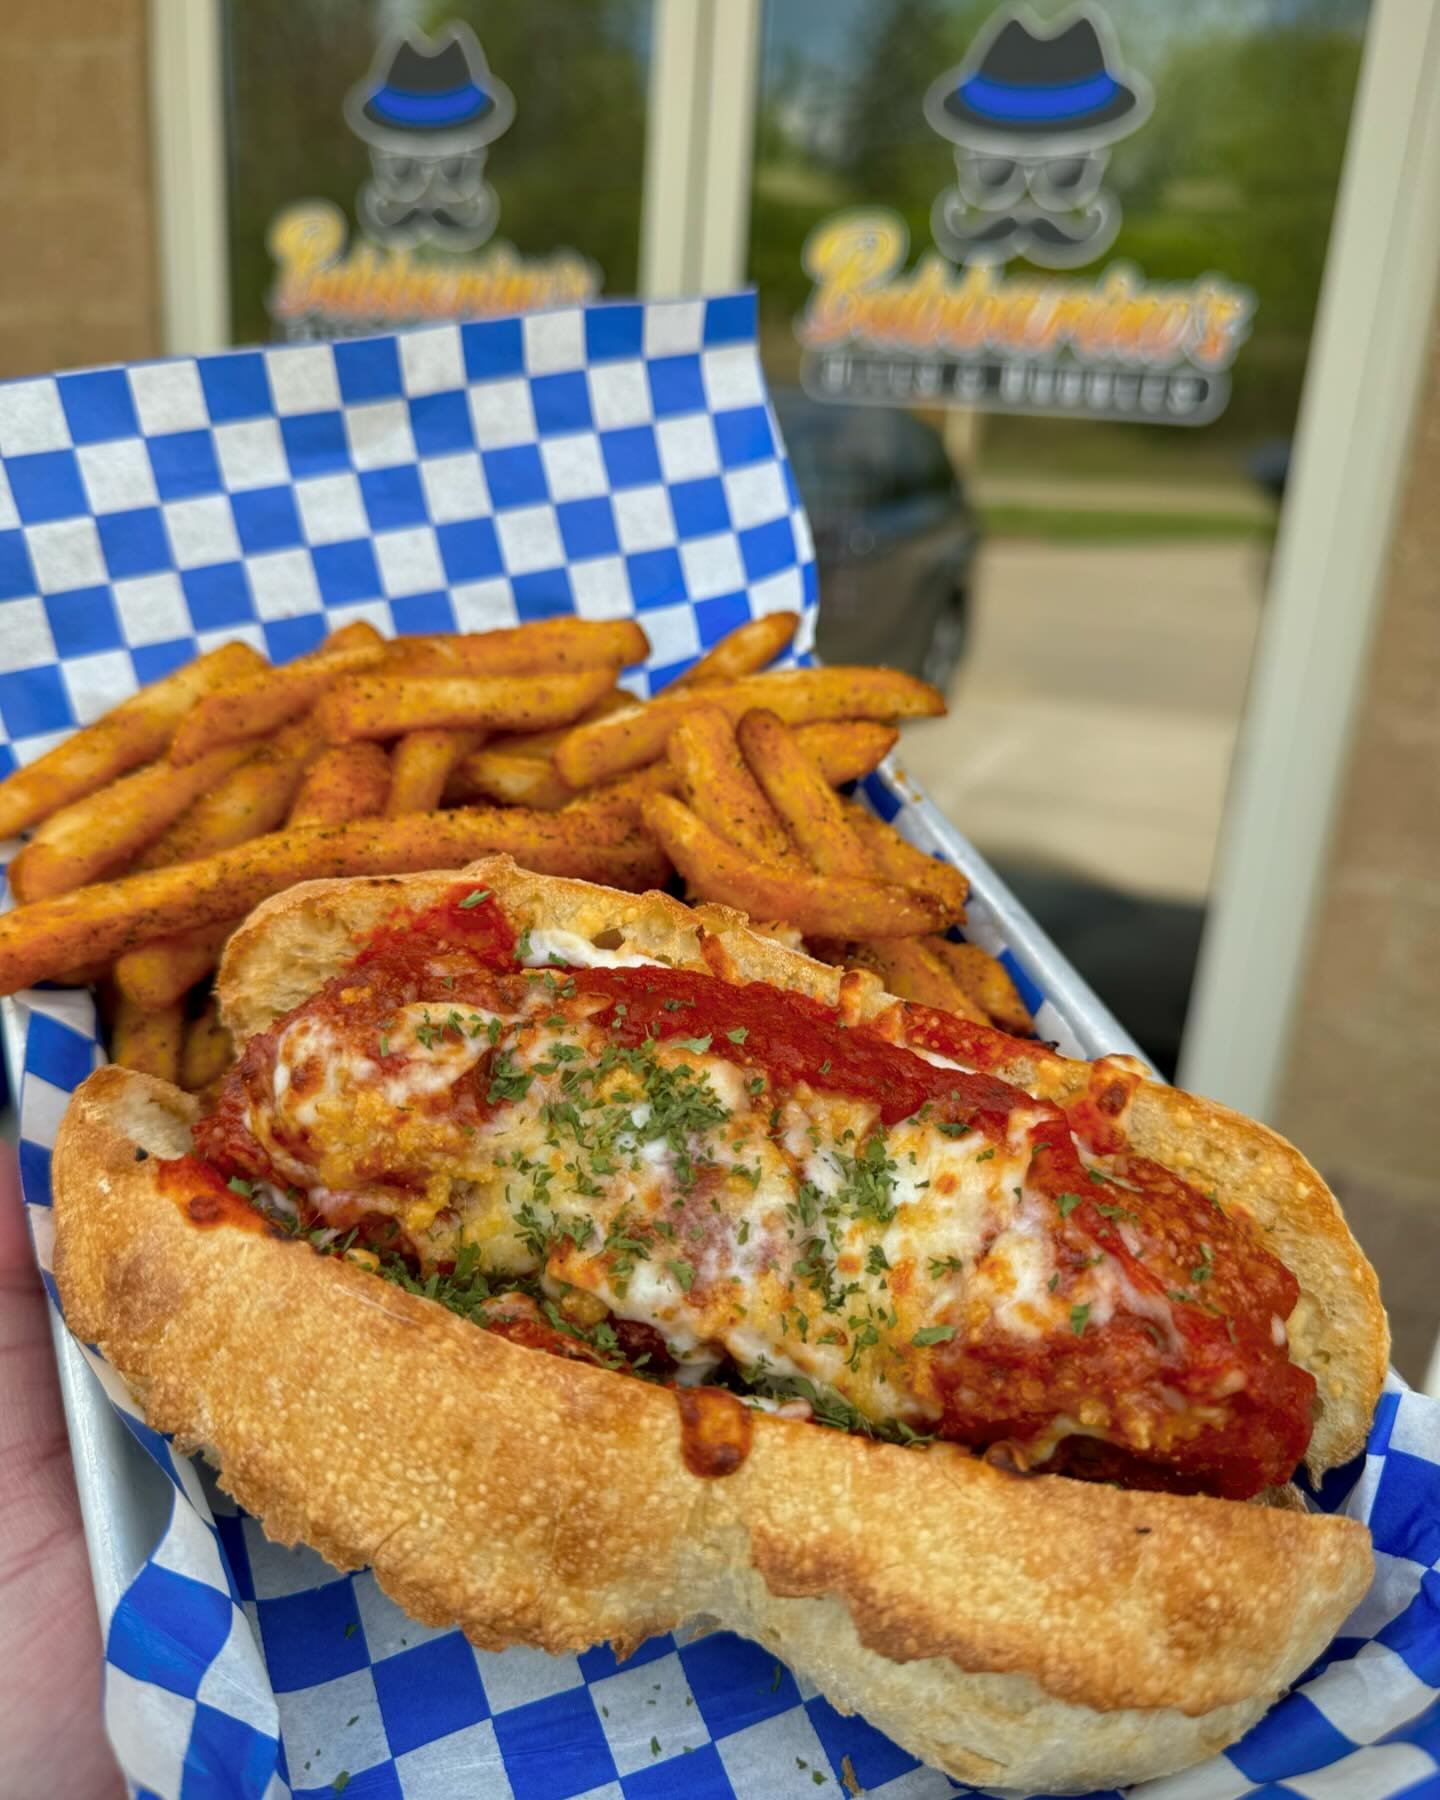 Make sure you come get our limited time specials while they last! Homemade Meatball Sub &amp; Hummus with Pita available while supplies last! 😎

📍 3501 Teays Valley Road, Hurricane 
💻 Order online - bubbarinos.com 
📞 Call now - 304.397.6037